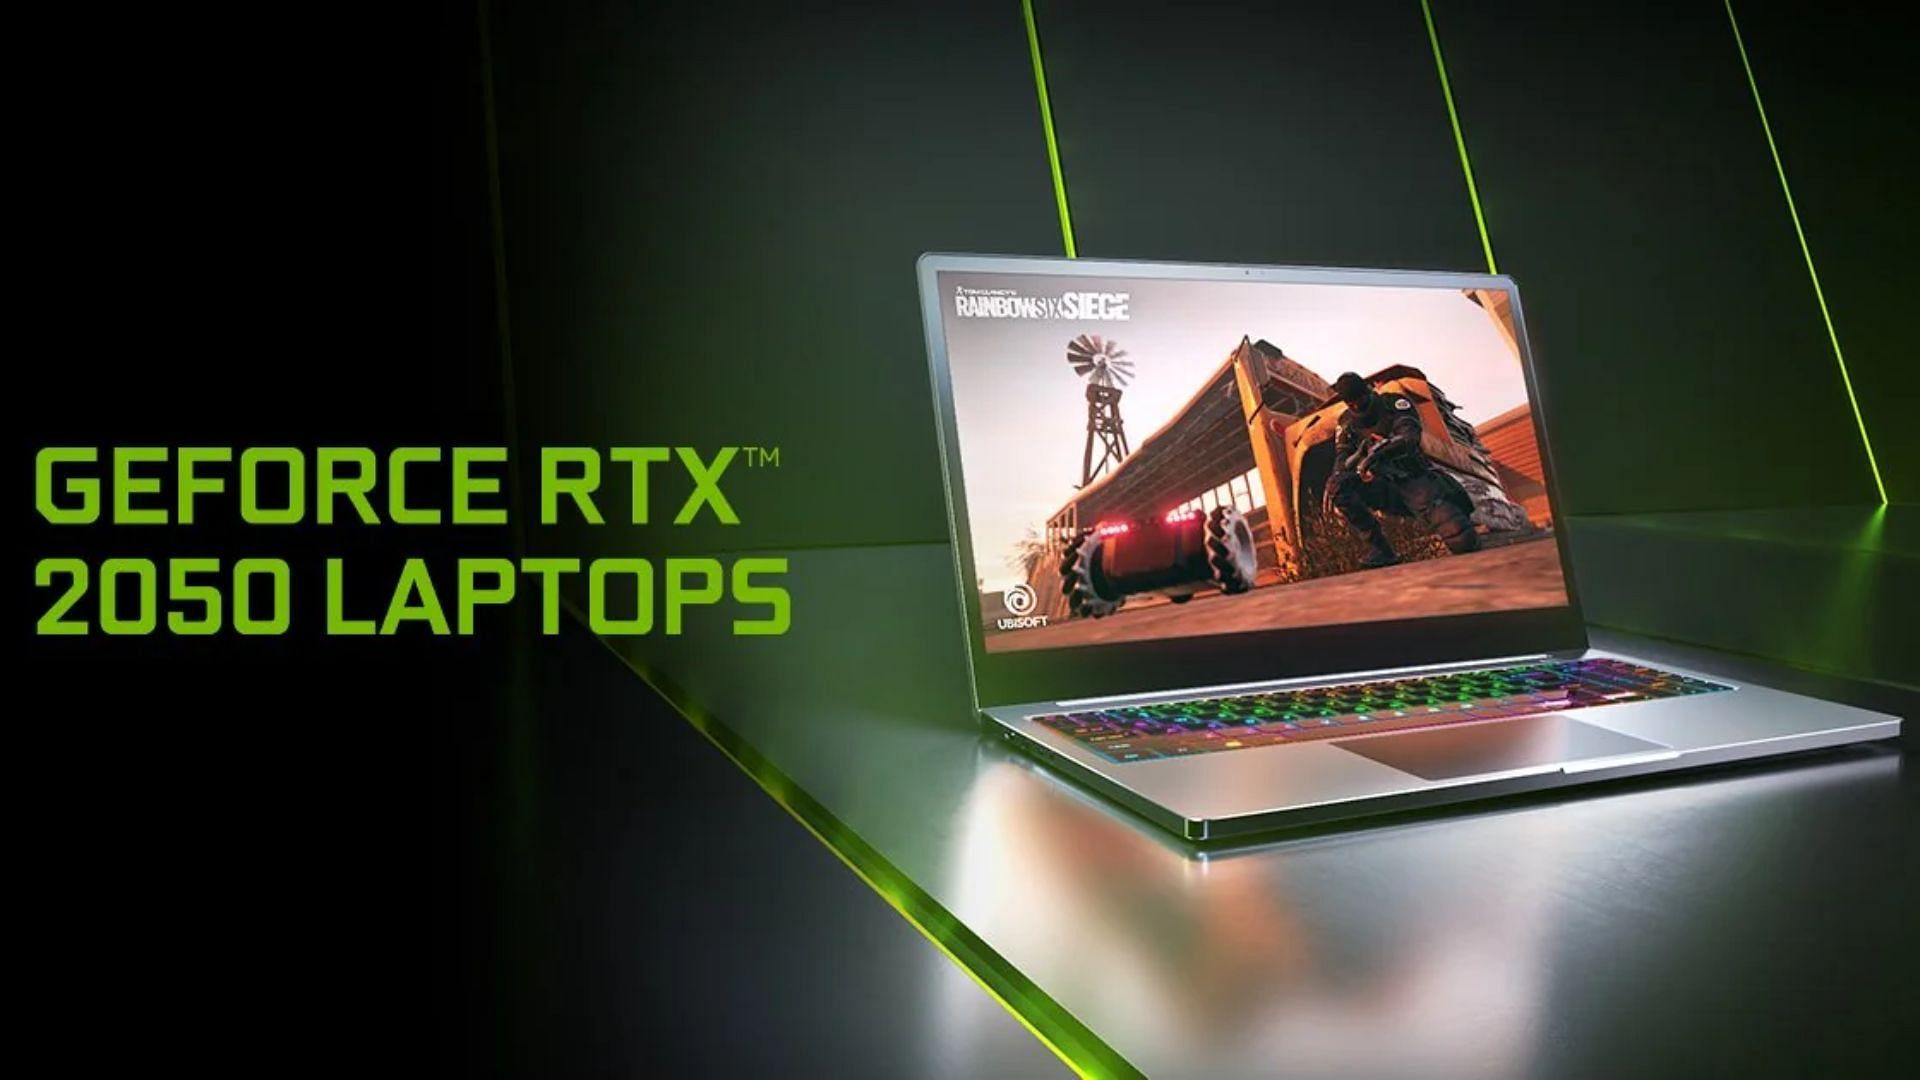 Nvidia RTX 2050 gaming laptops continue to be capable enough of playing the latest titles (Image via Nvidia)